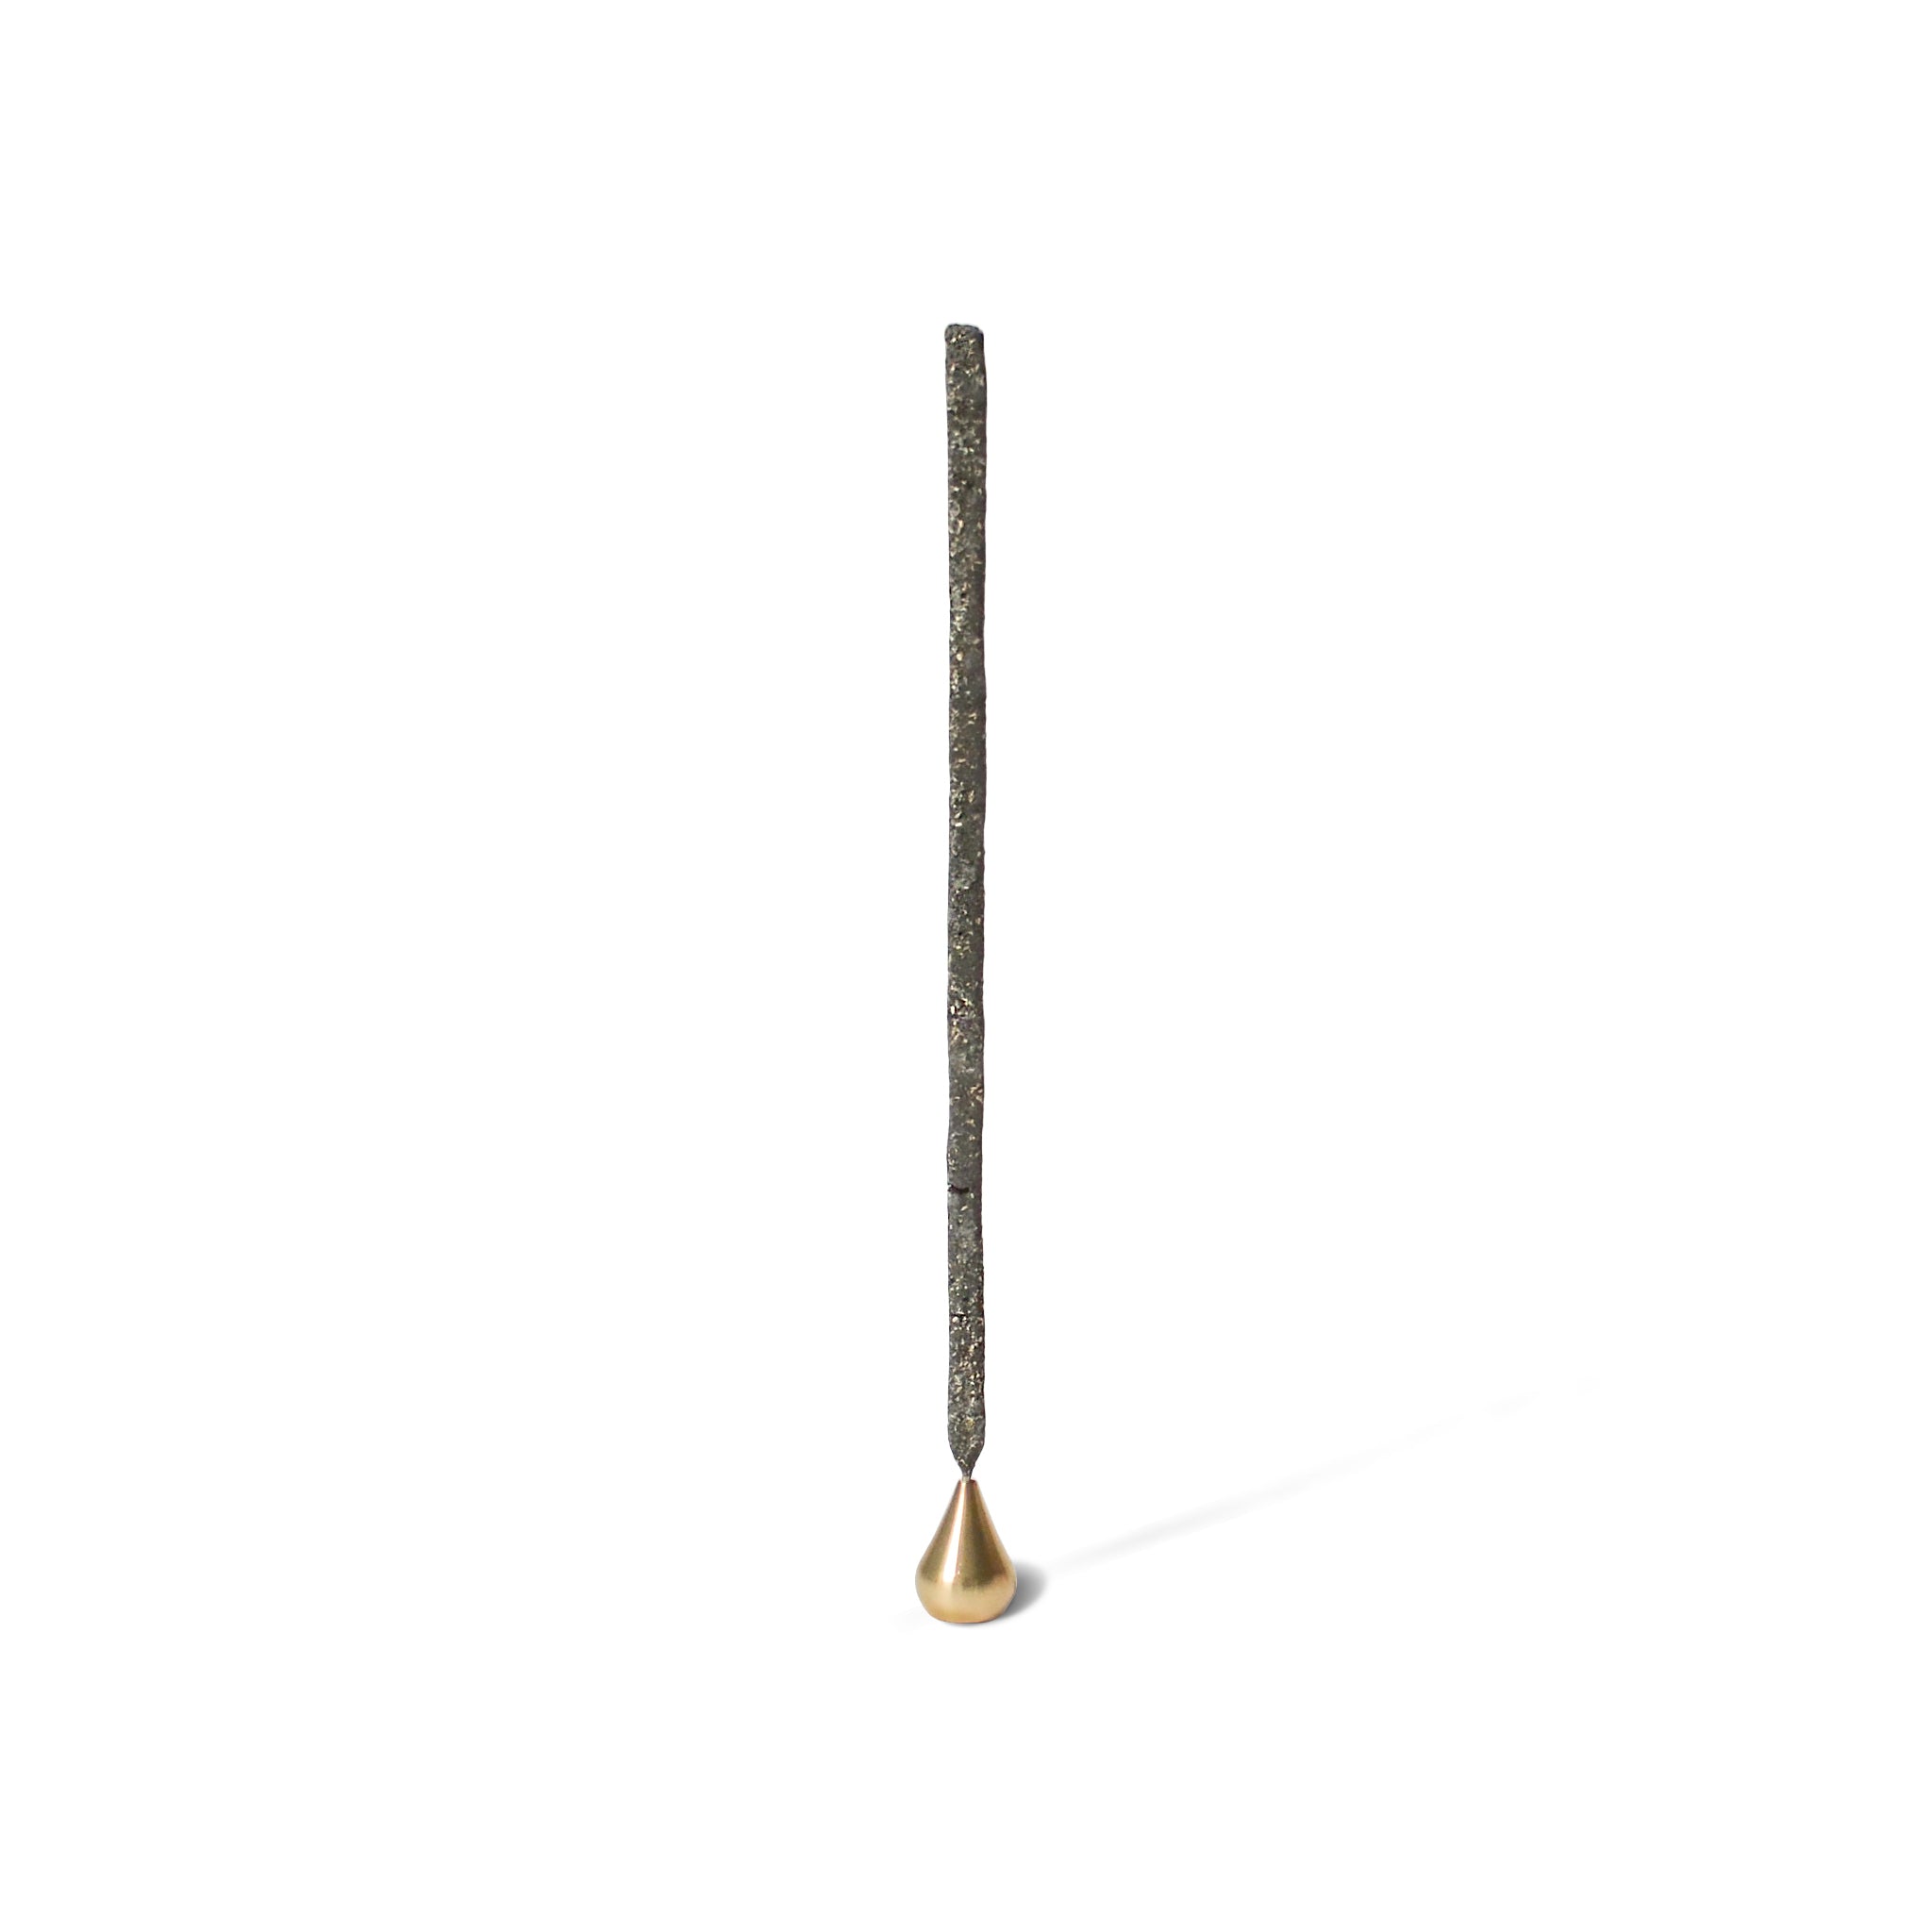 copal incense stick with incense holder with a tall brass waterdrop